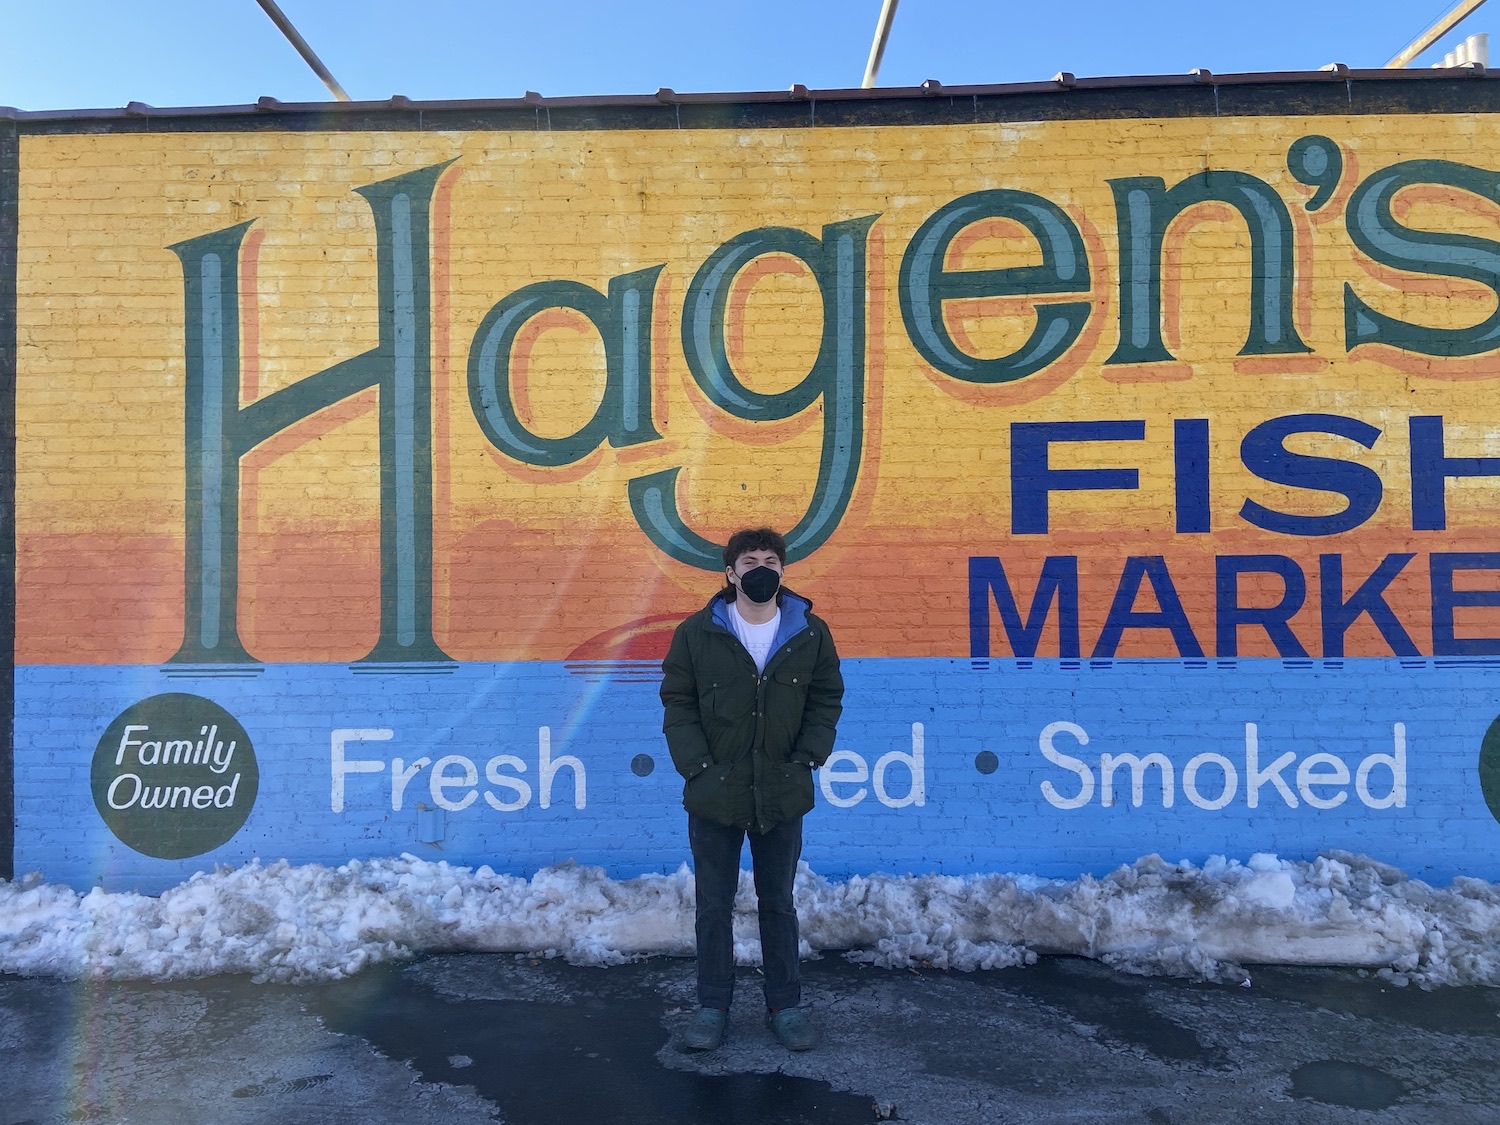 Sammy standing in front of the brick wall mural at Hagen's Fish Market.